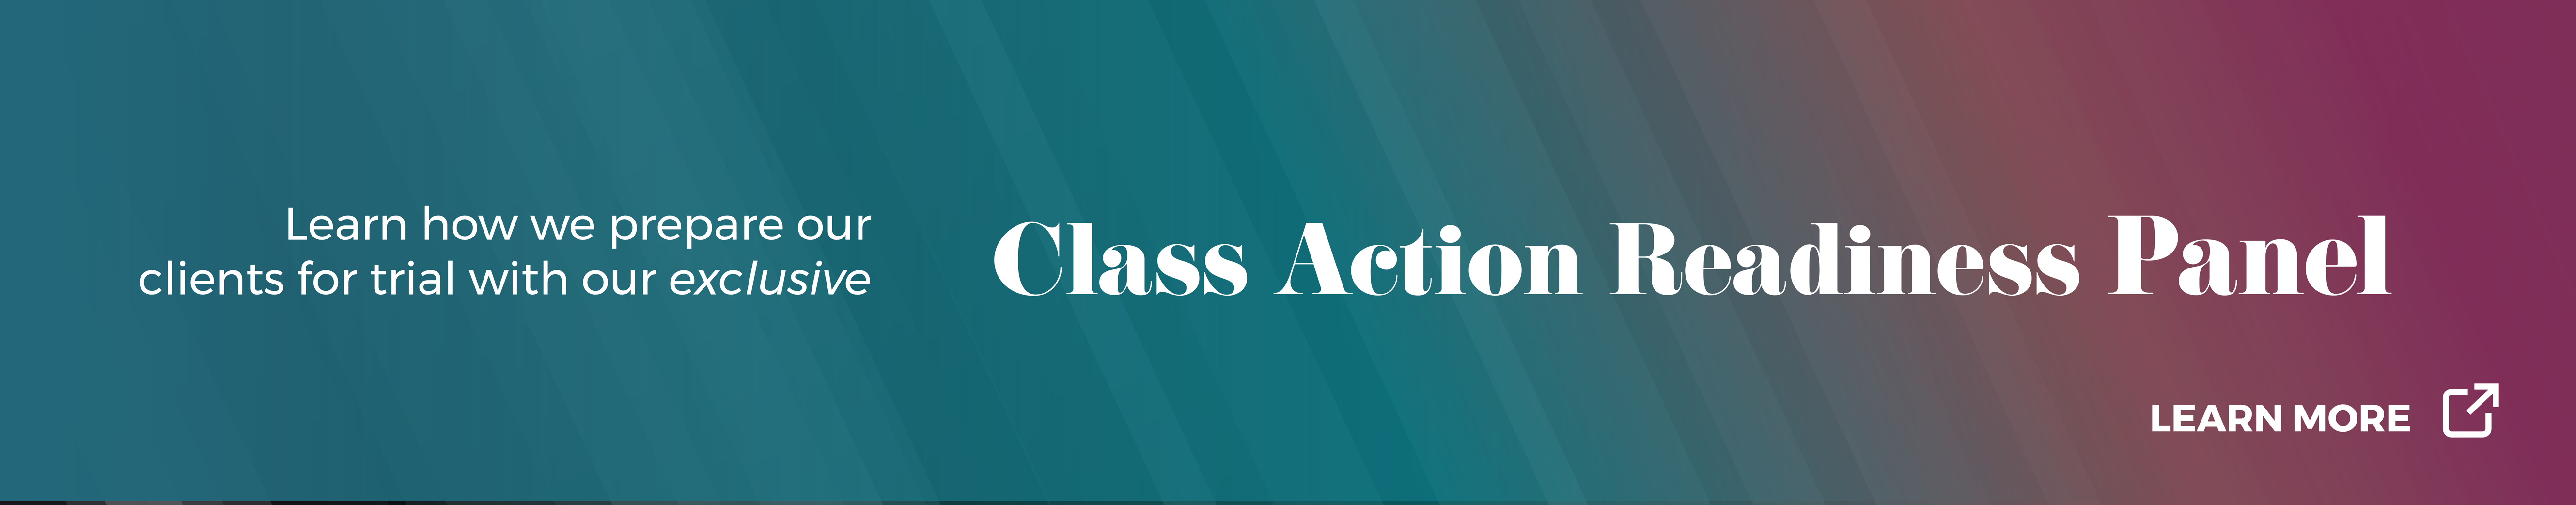 Class Action Readiness Panel